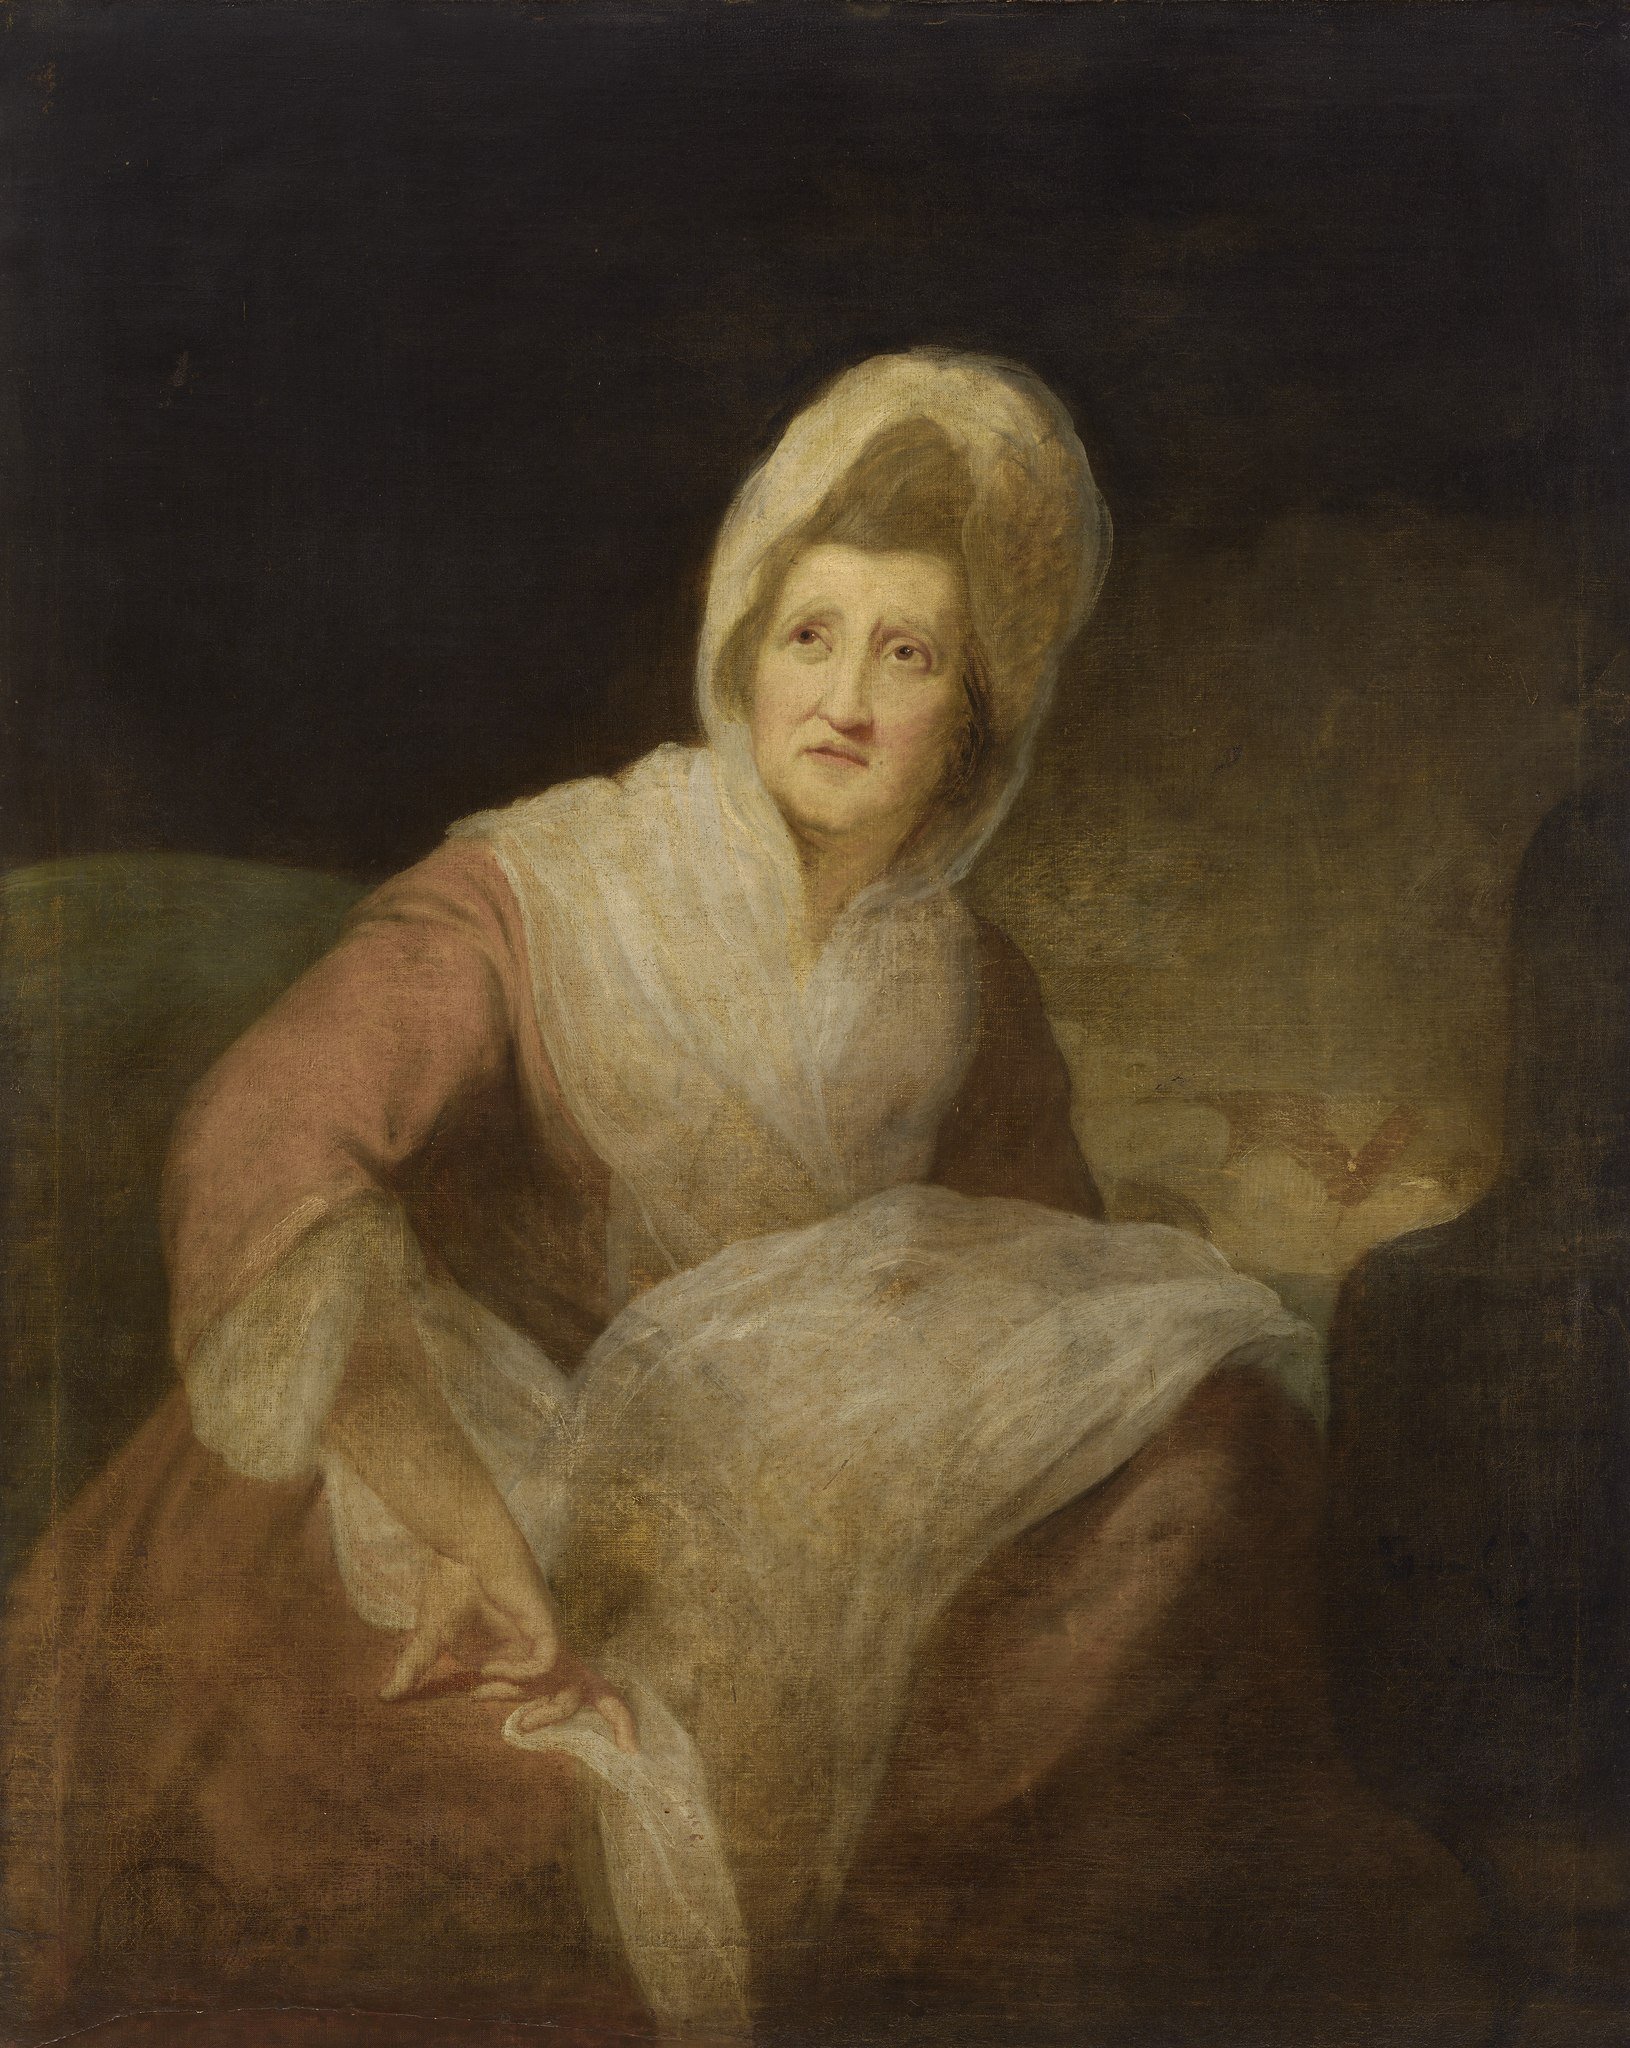 A painting of a woman in a white dress, sitting down and looking up with a pondering expression on her face.